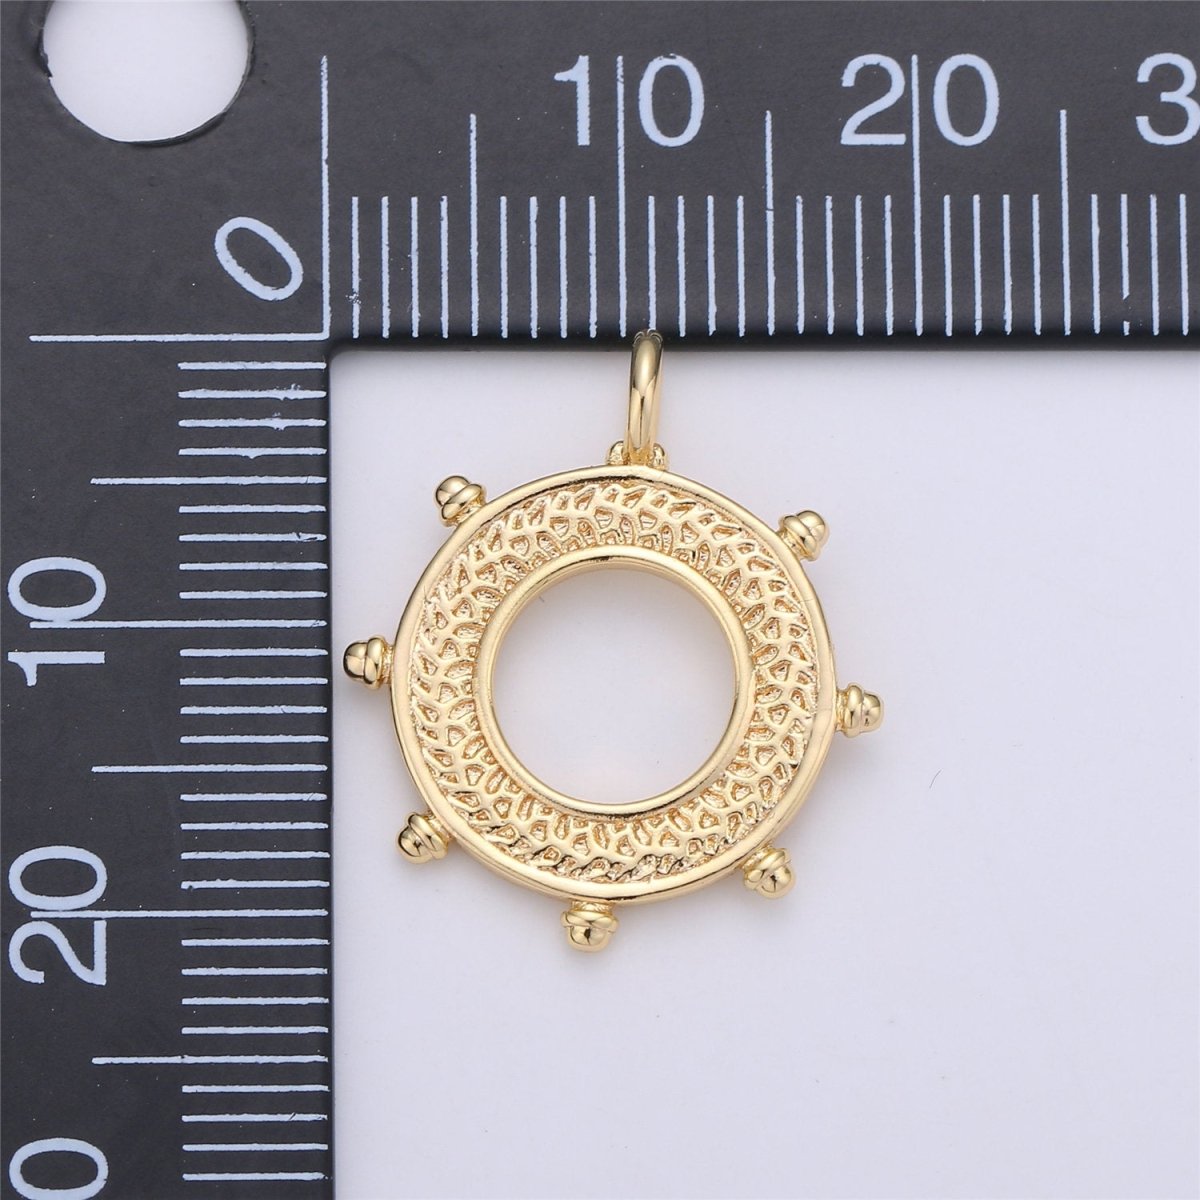 24k Gold Filled Ship Wheel Charms Helm Charms for Earring Bracelet Necklace Pendants Nautical Jewelry C-663 - DLUXCA